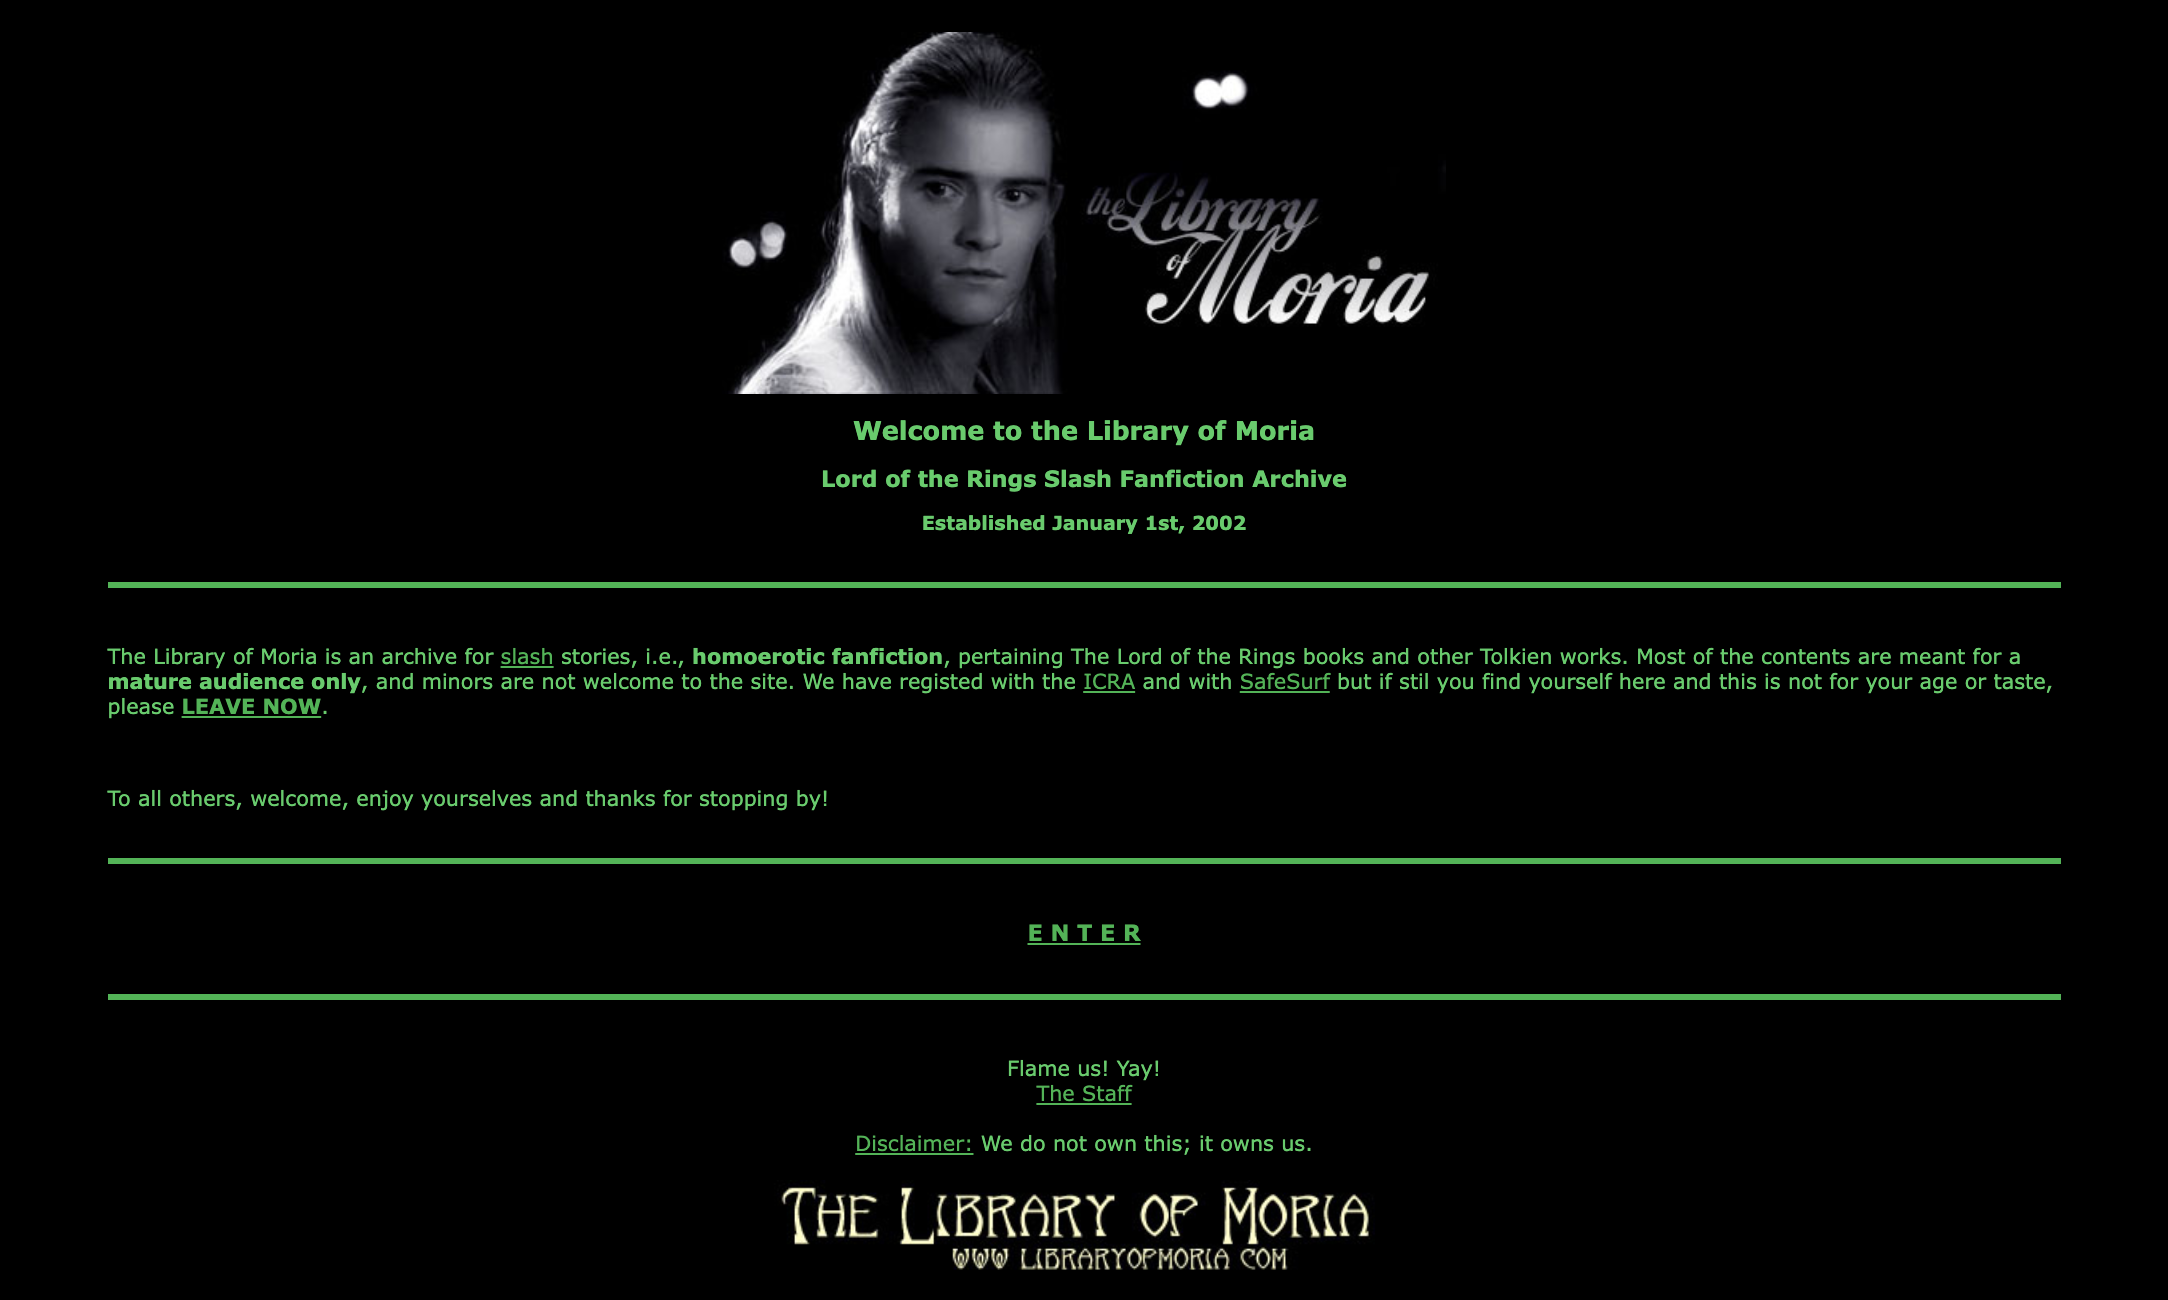 A screenshot of the Library of Moria's homepage as of the writing of this article, showing the distinctive black background and warnings